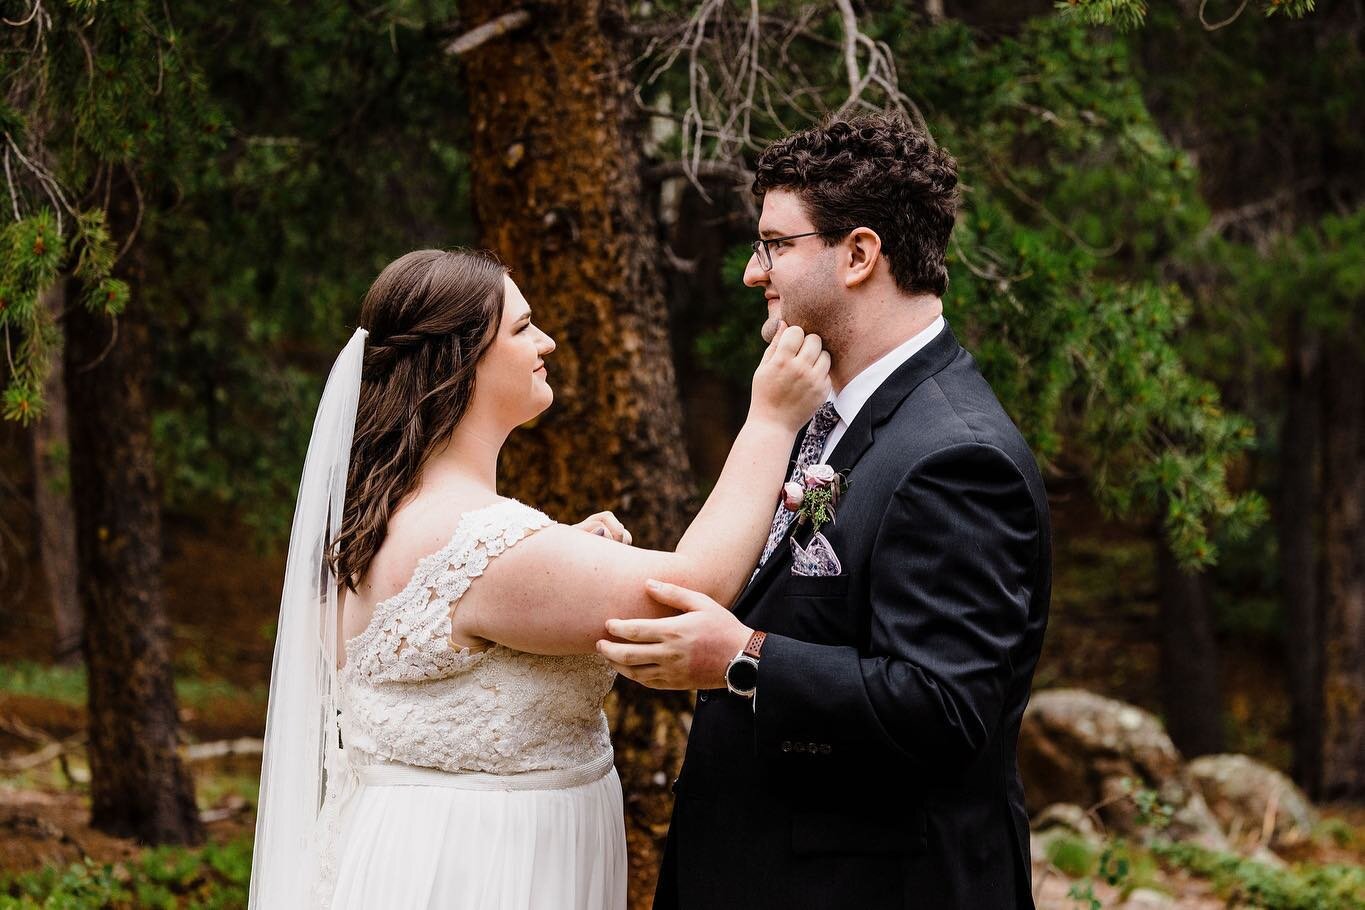 Alex + Bailey eloped at one of our favorite small venues in Colorado. What we love most about elopements is how you truly start with a blank canvas and you can craft a day to be exactly what you want it to be.

It&rsquo;s a common misconception that 